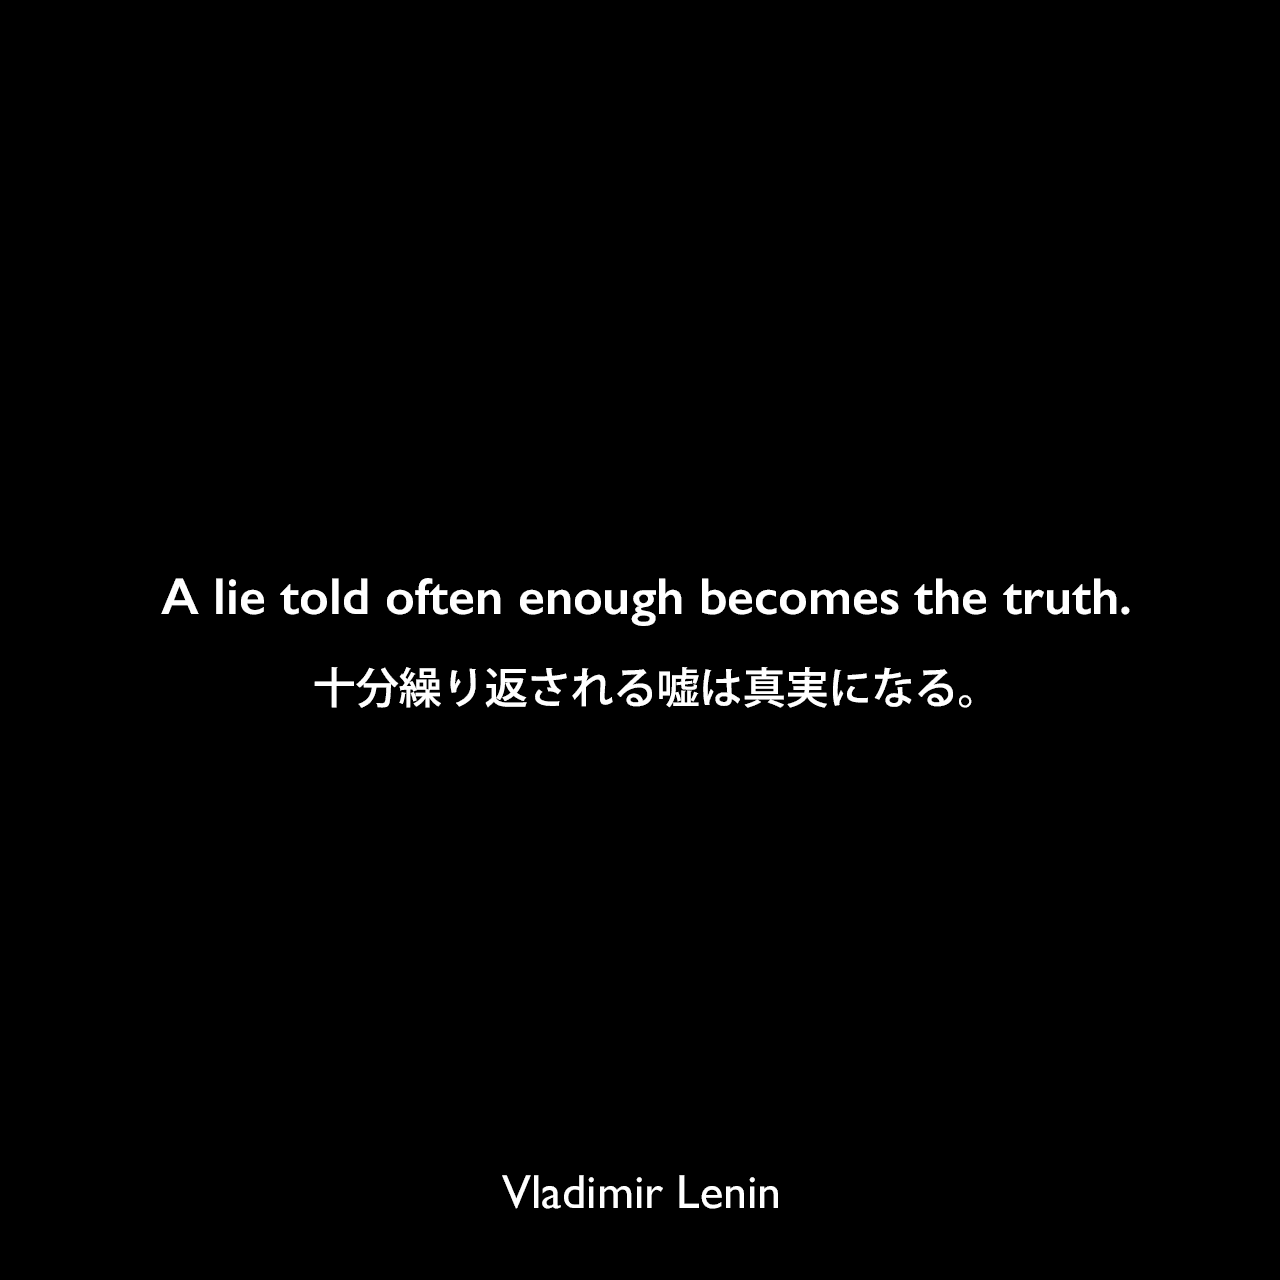 A lie told often enough becomes the truth.十分繰り返される嘘は真実になる。Vladimir Lenin